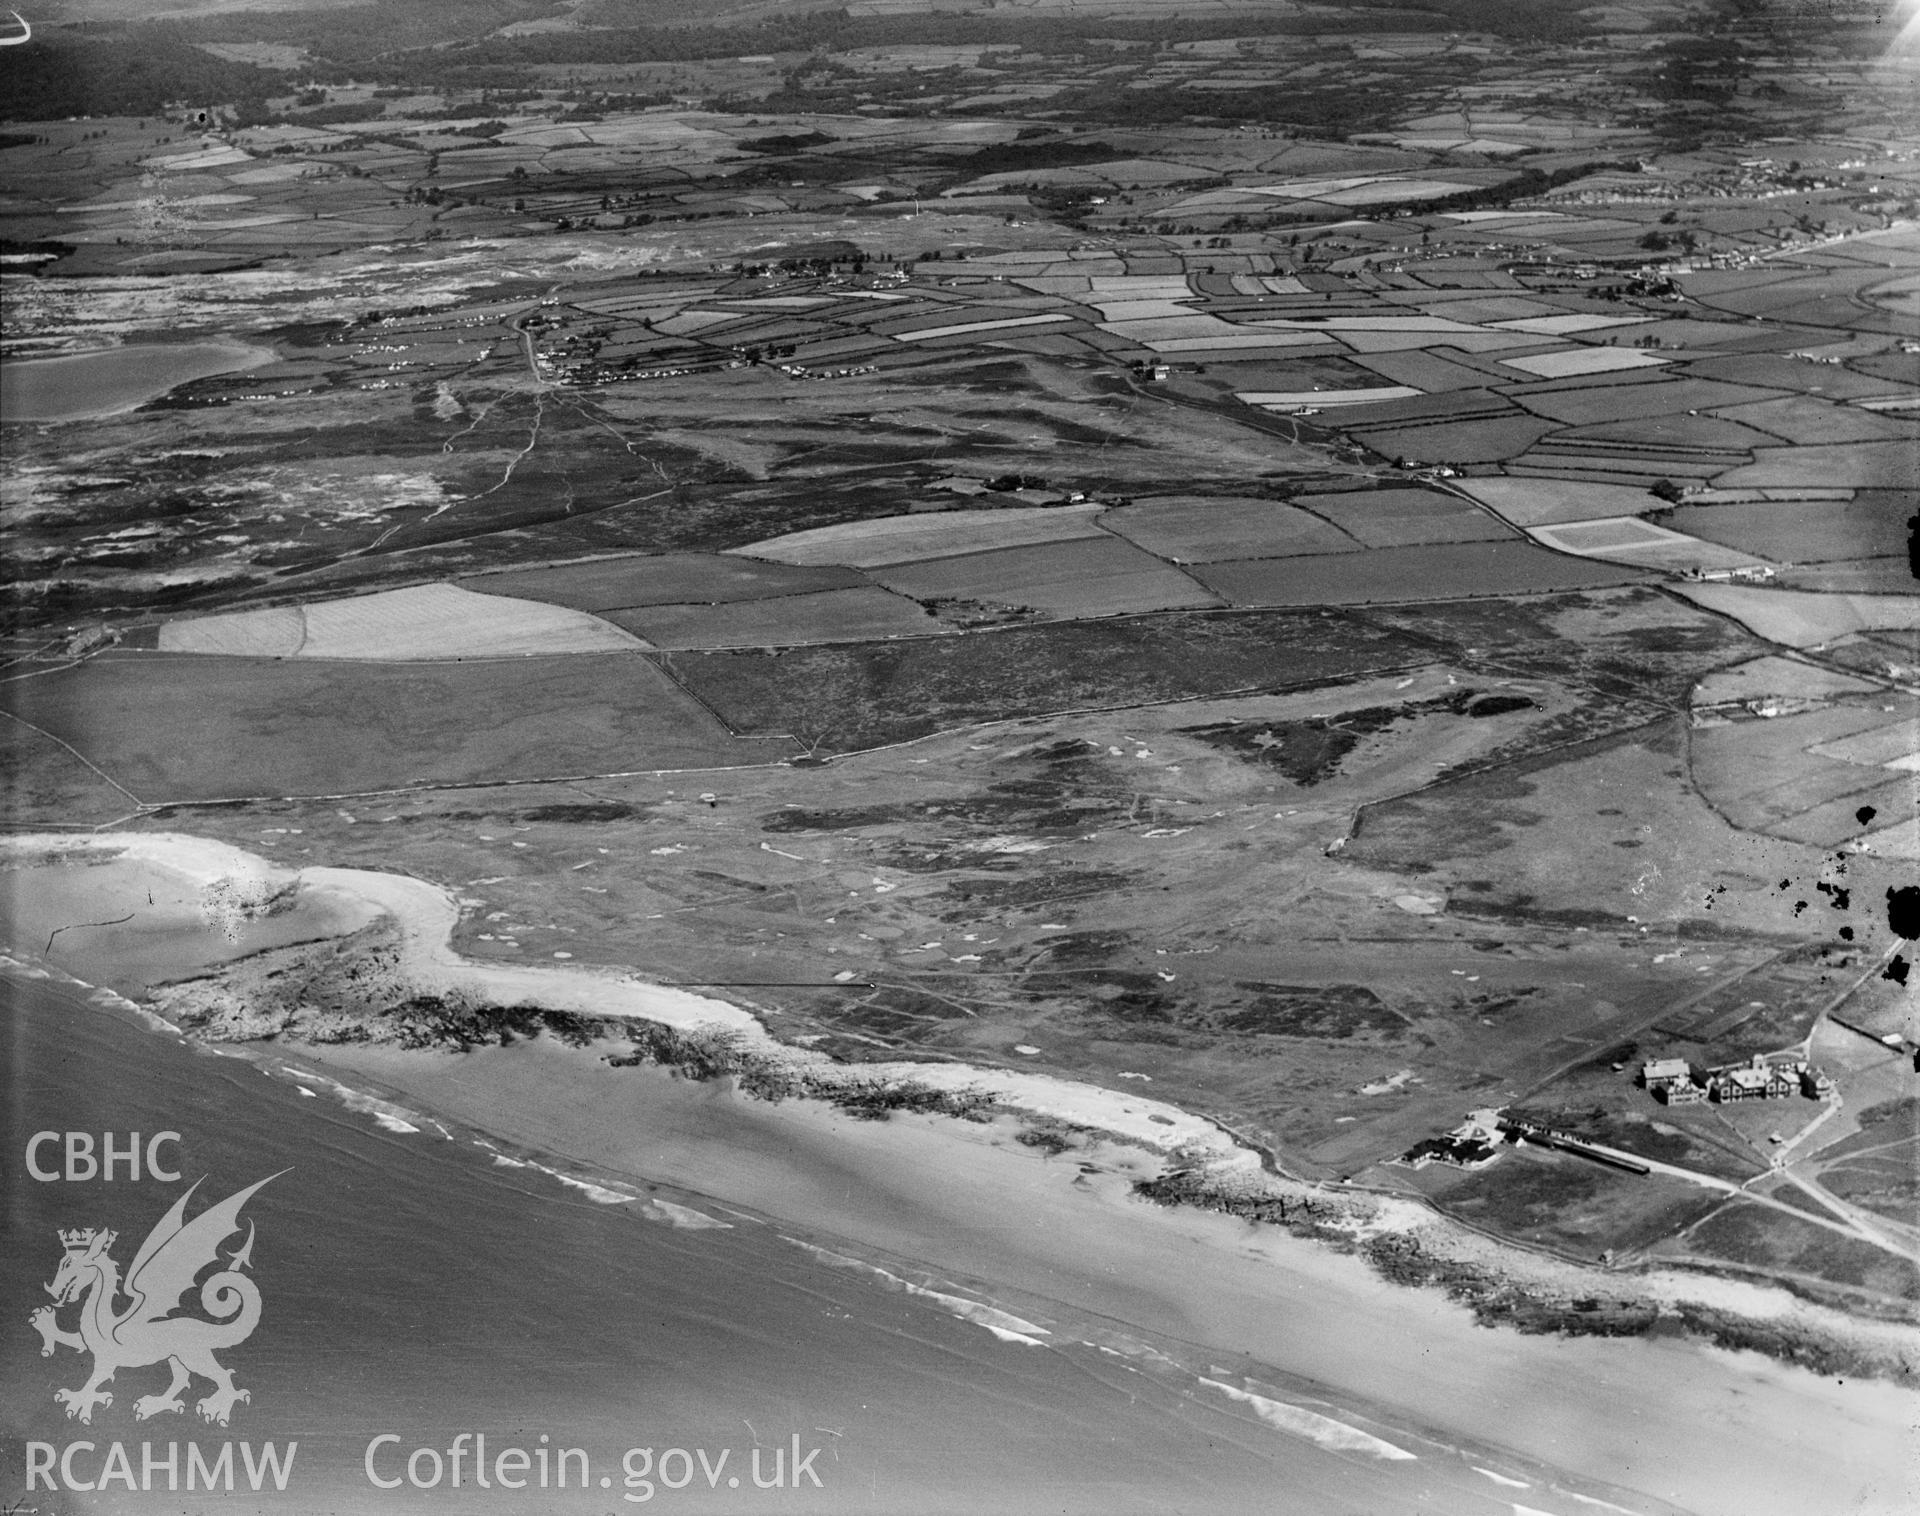 View of Royal Porthcawl golf couse and clubhouse, oblique aerial view. 5?x4? black and white glass plate negative.